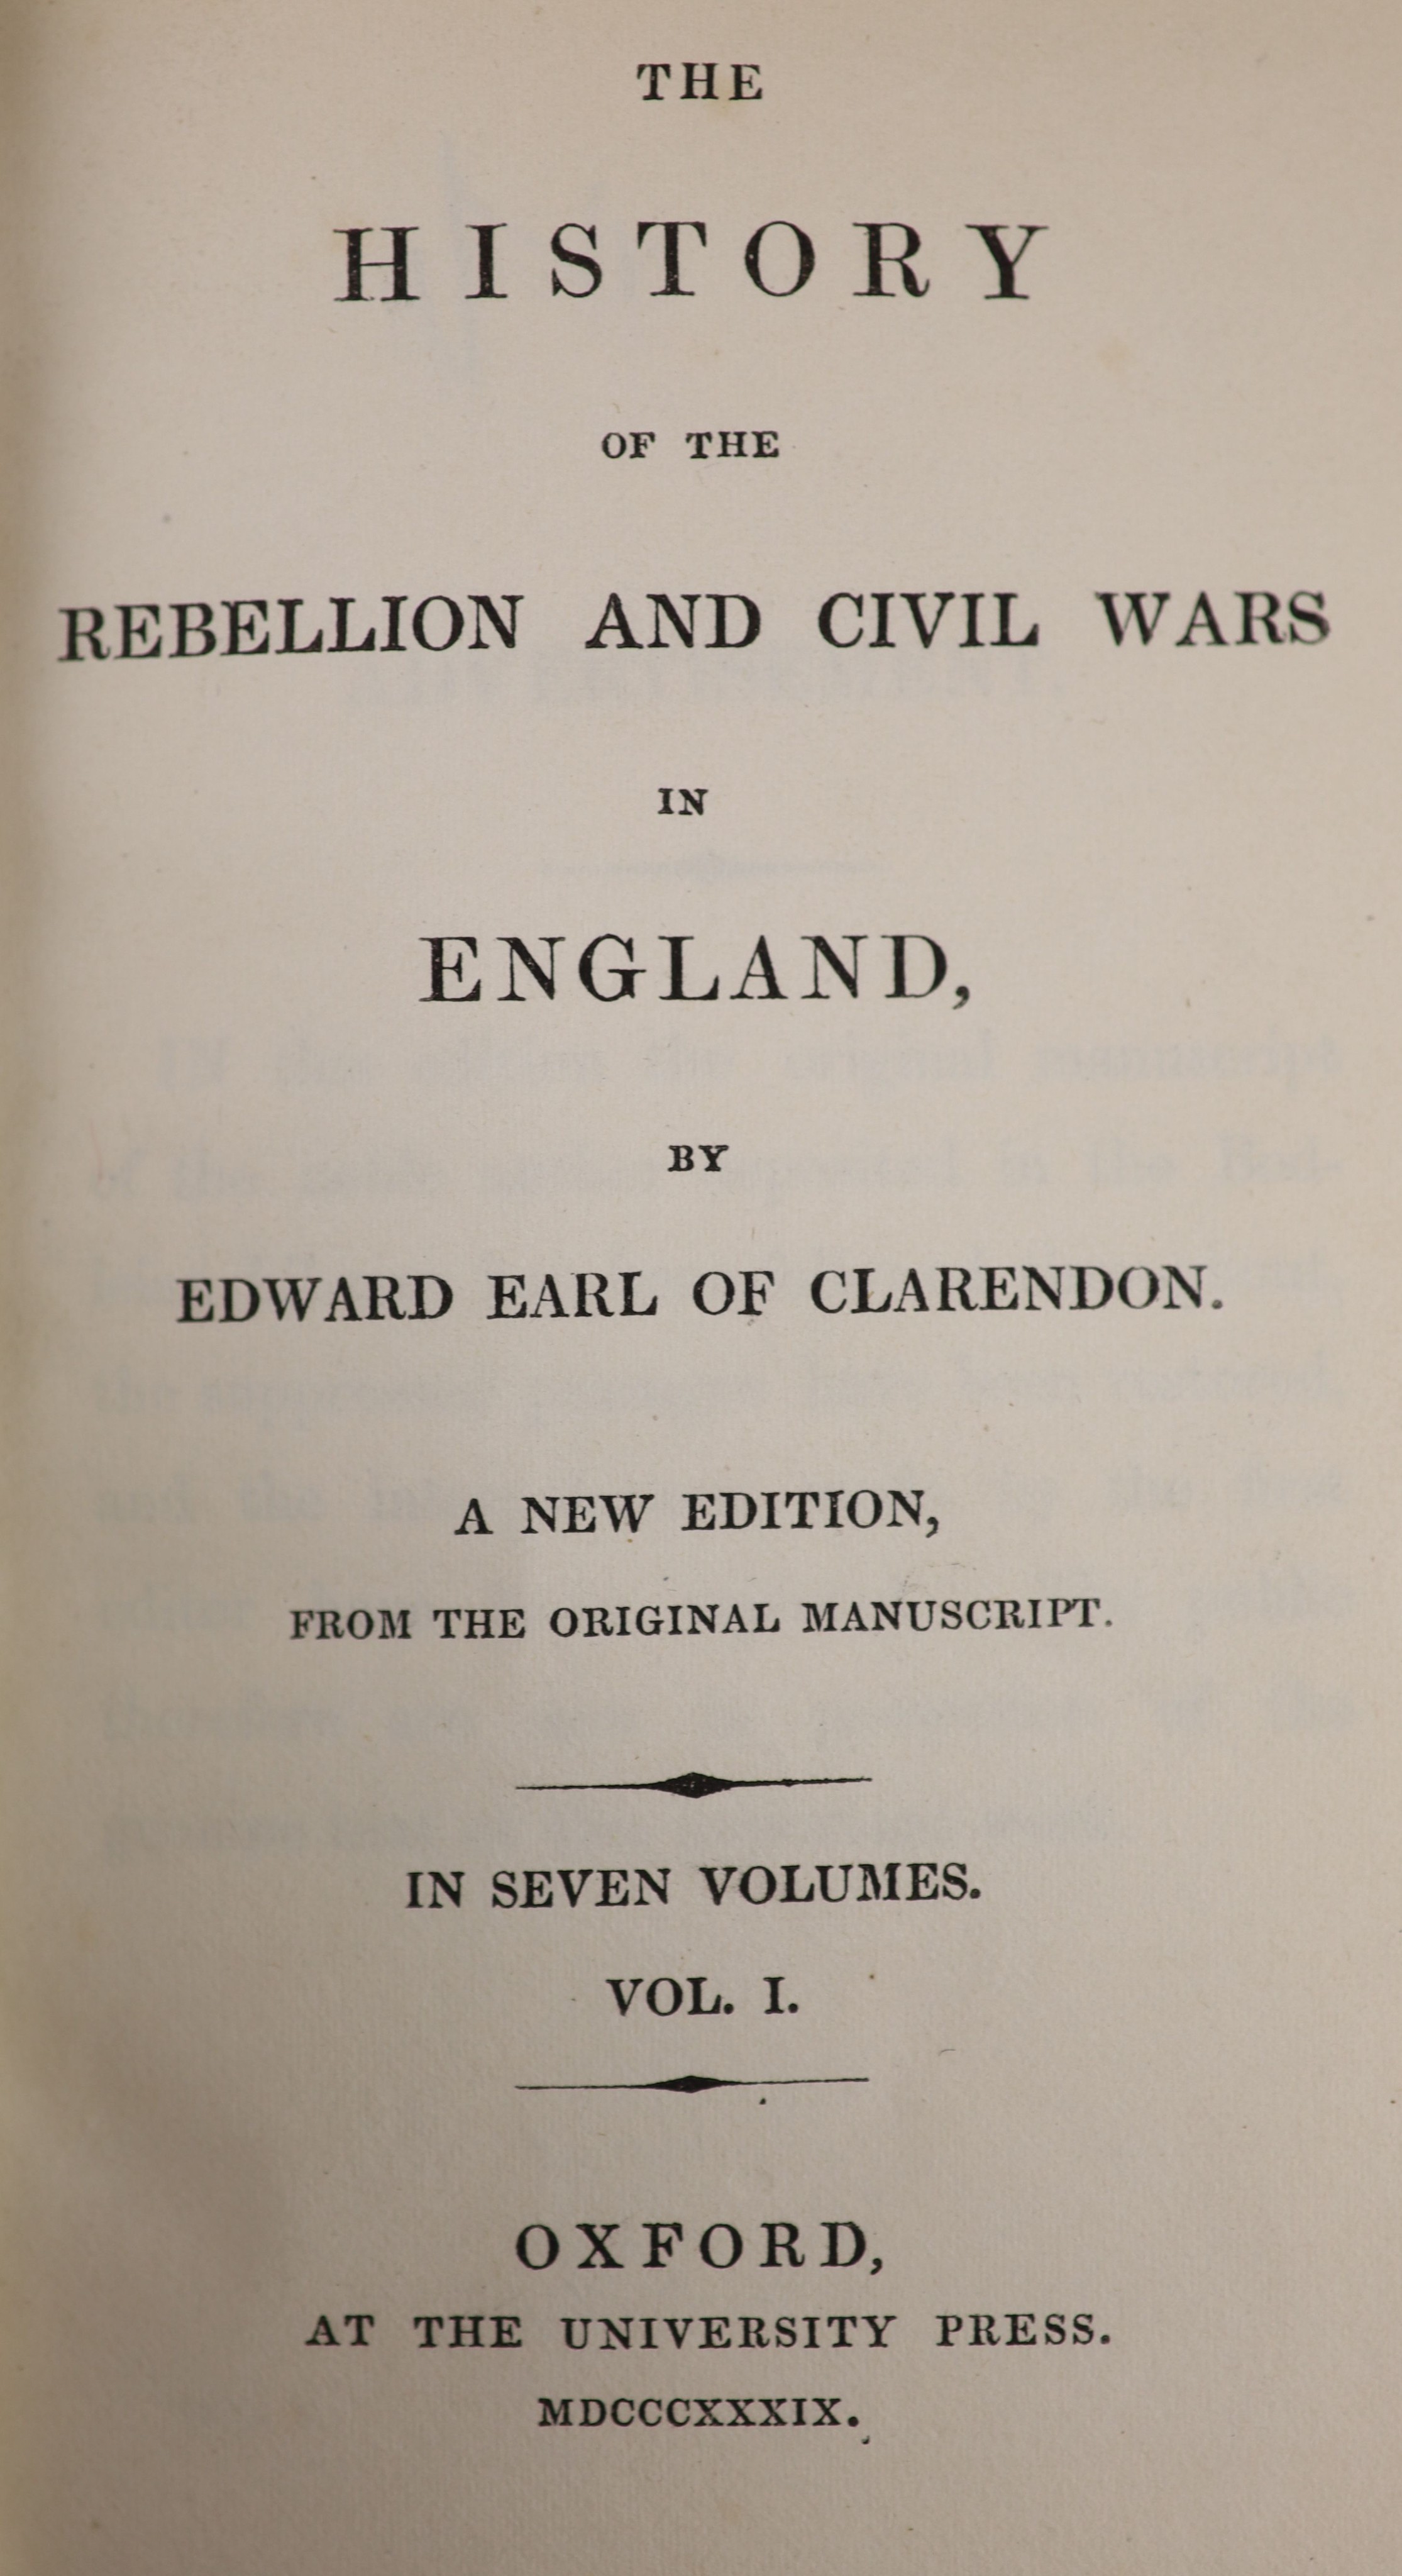 Clarendon, Edward Earl of - The History of the Rebellion and the Civil Wars in England. A new edition, from the original manuscript. 7 Vols. Gilt ruled calf with gilt panelled and decorated spines and 2 morocco labels. S